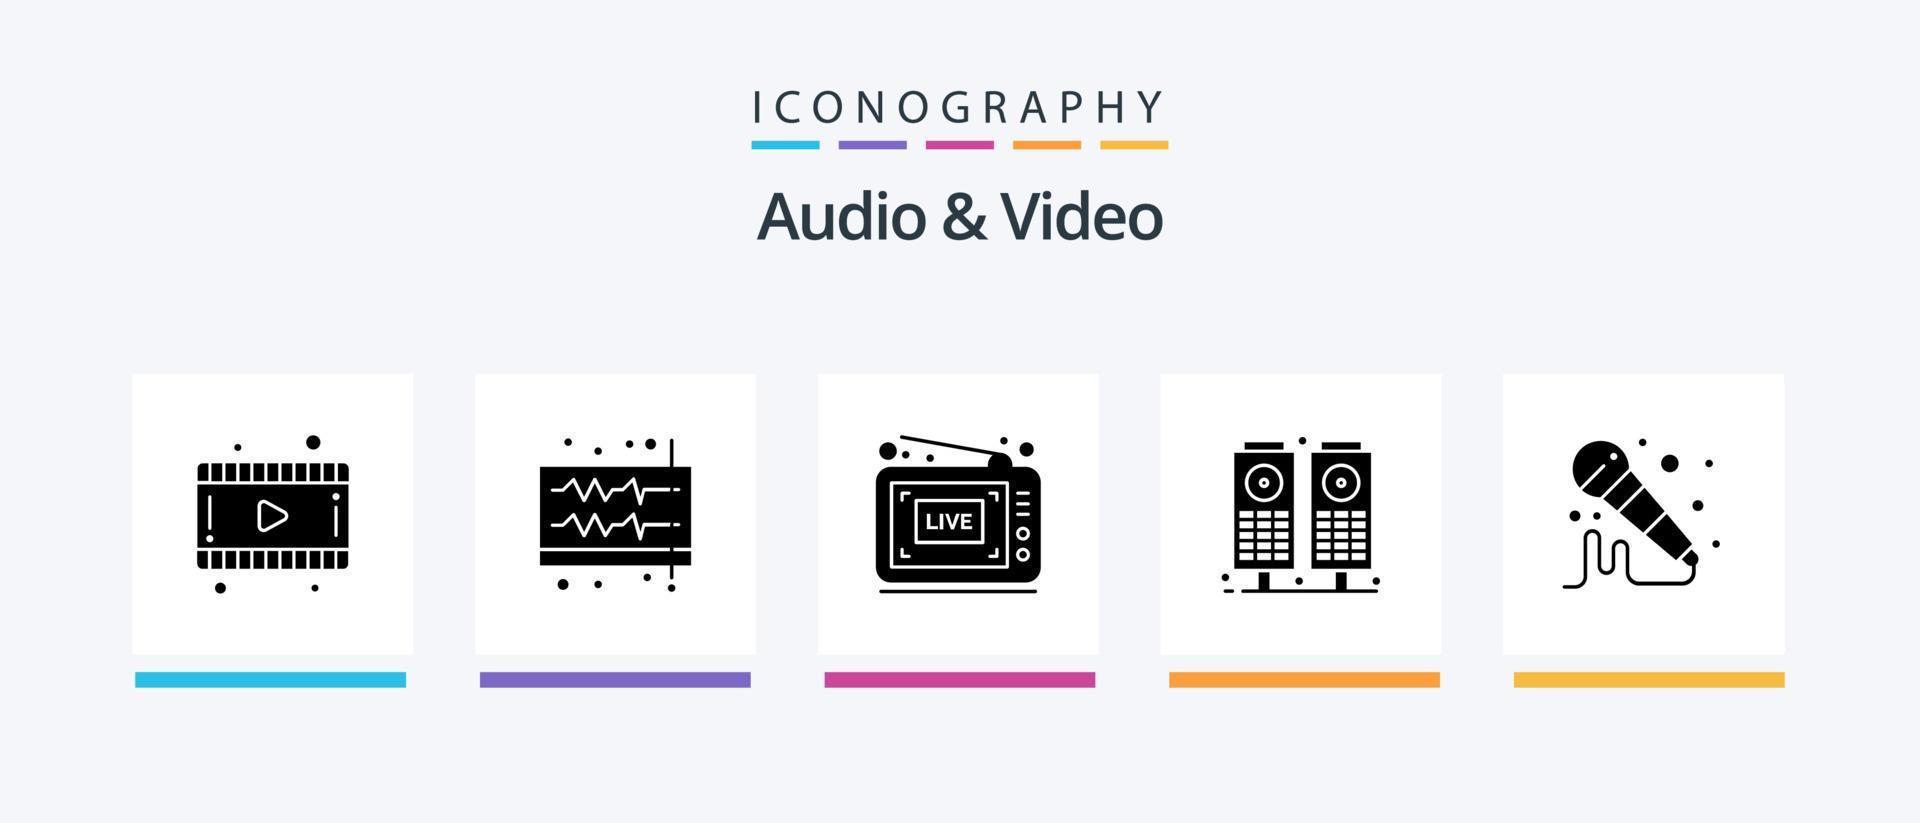 Audio And Video Glyph 5 Icon Pack Including sound. mic. broadcast. speaker. music. Creative Icons Design vector